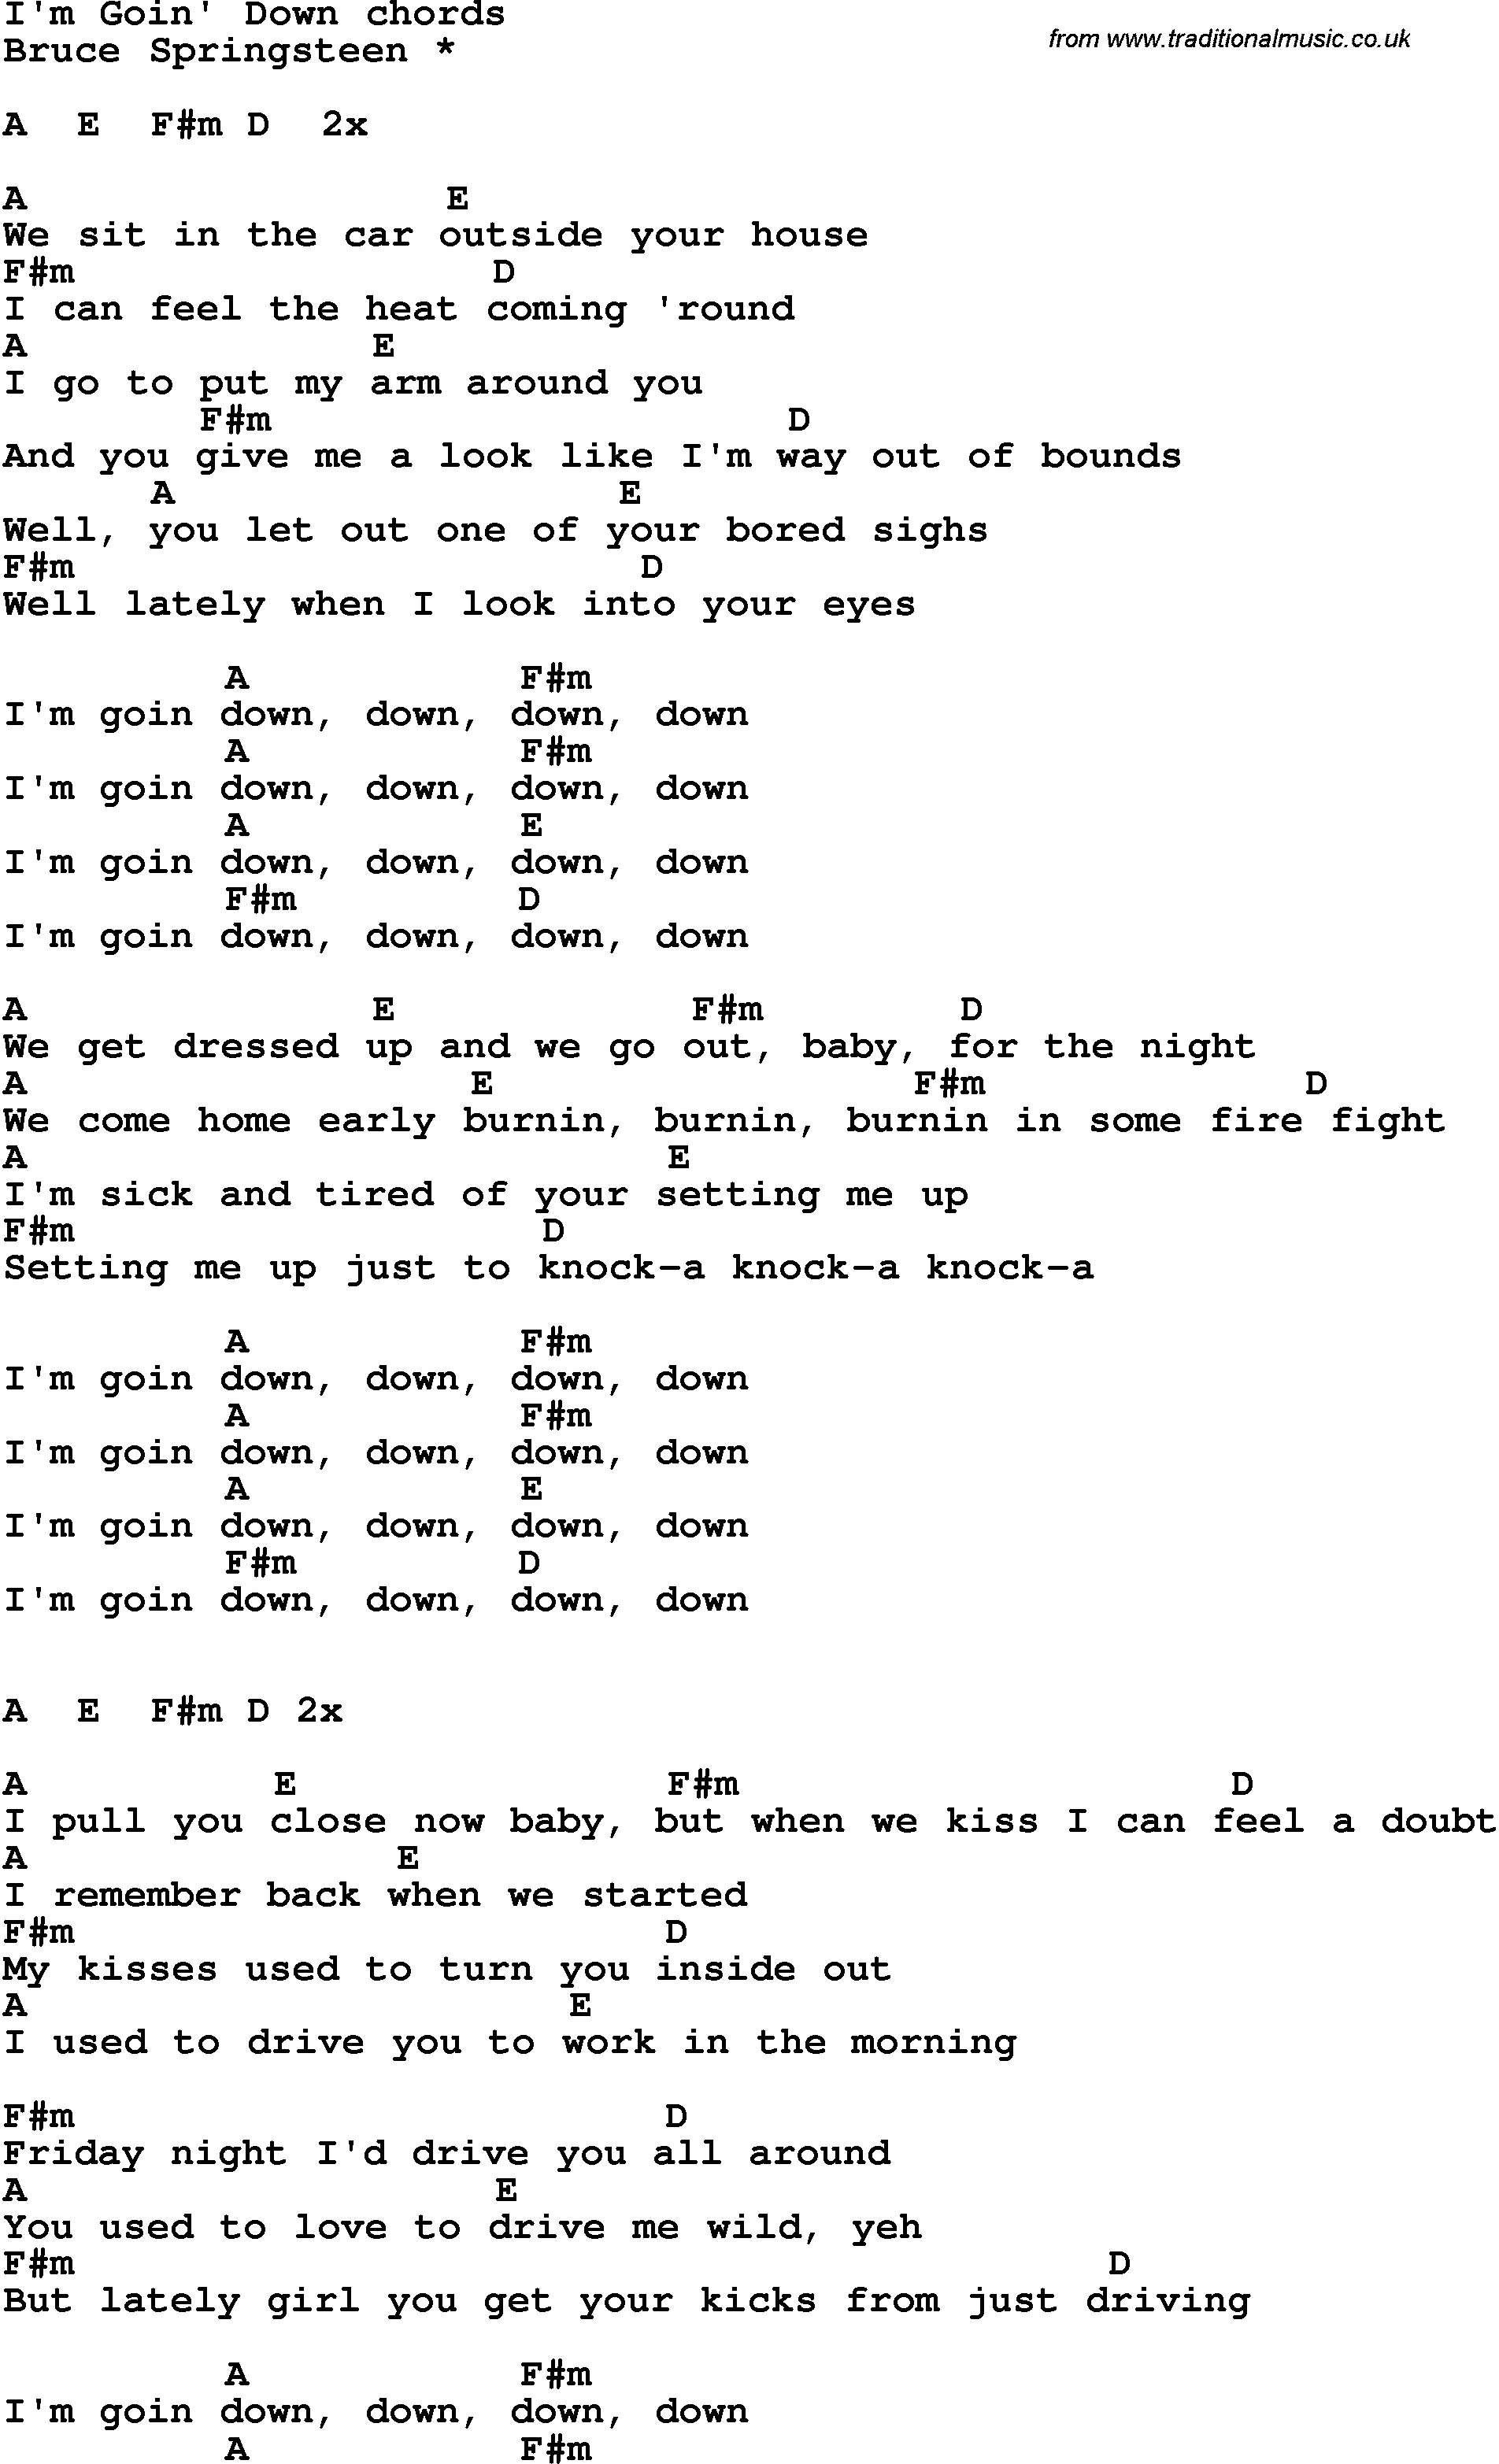 From The Inside Out Chords Song Lyrics With Guitar Chords For Im Goin Down